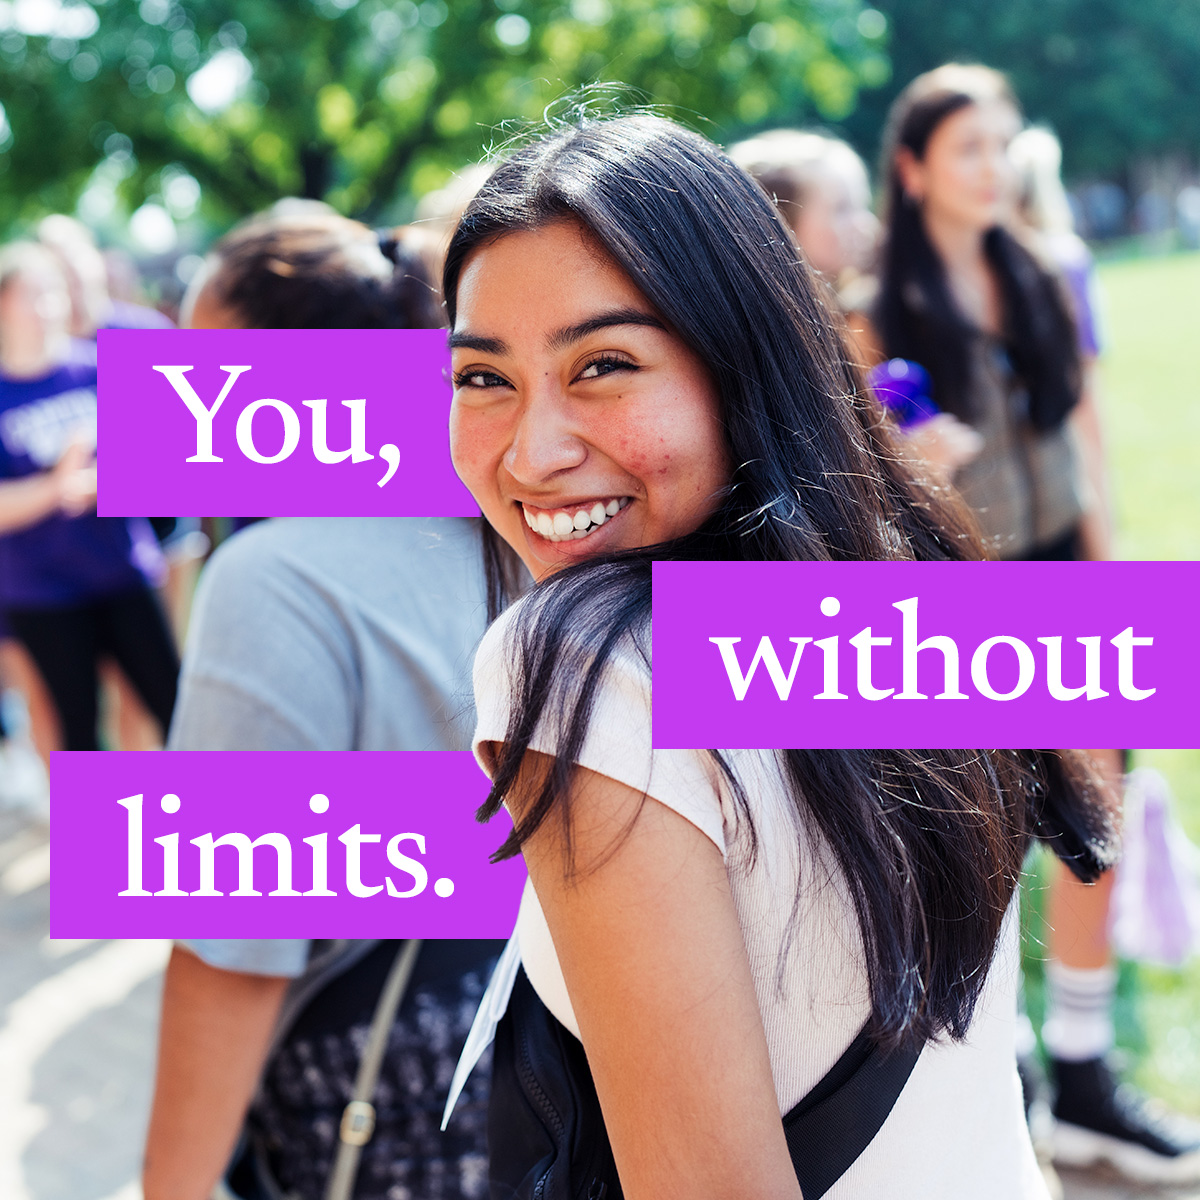 You, without limits.